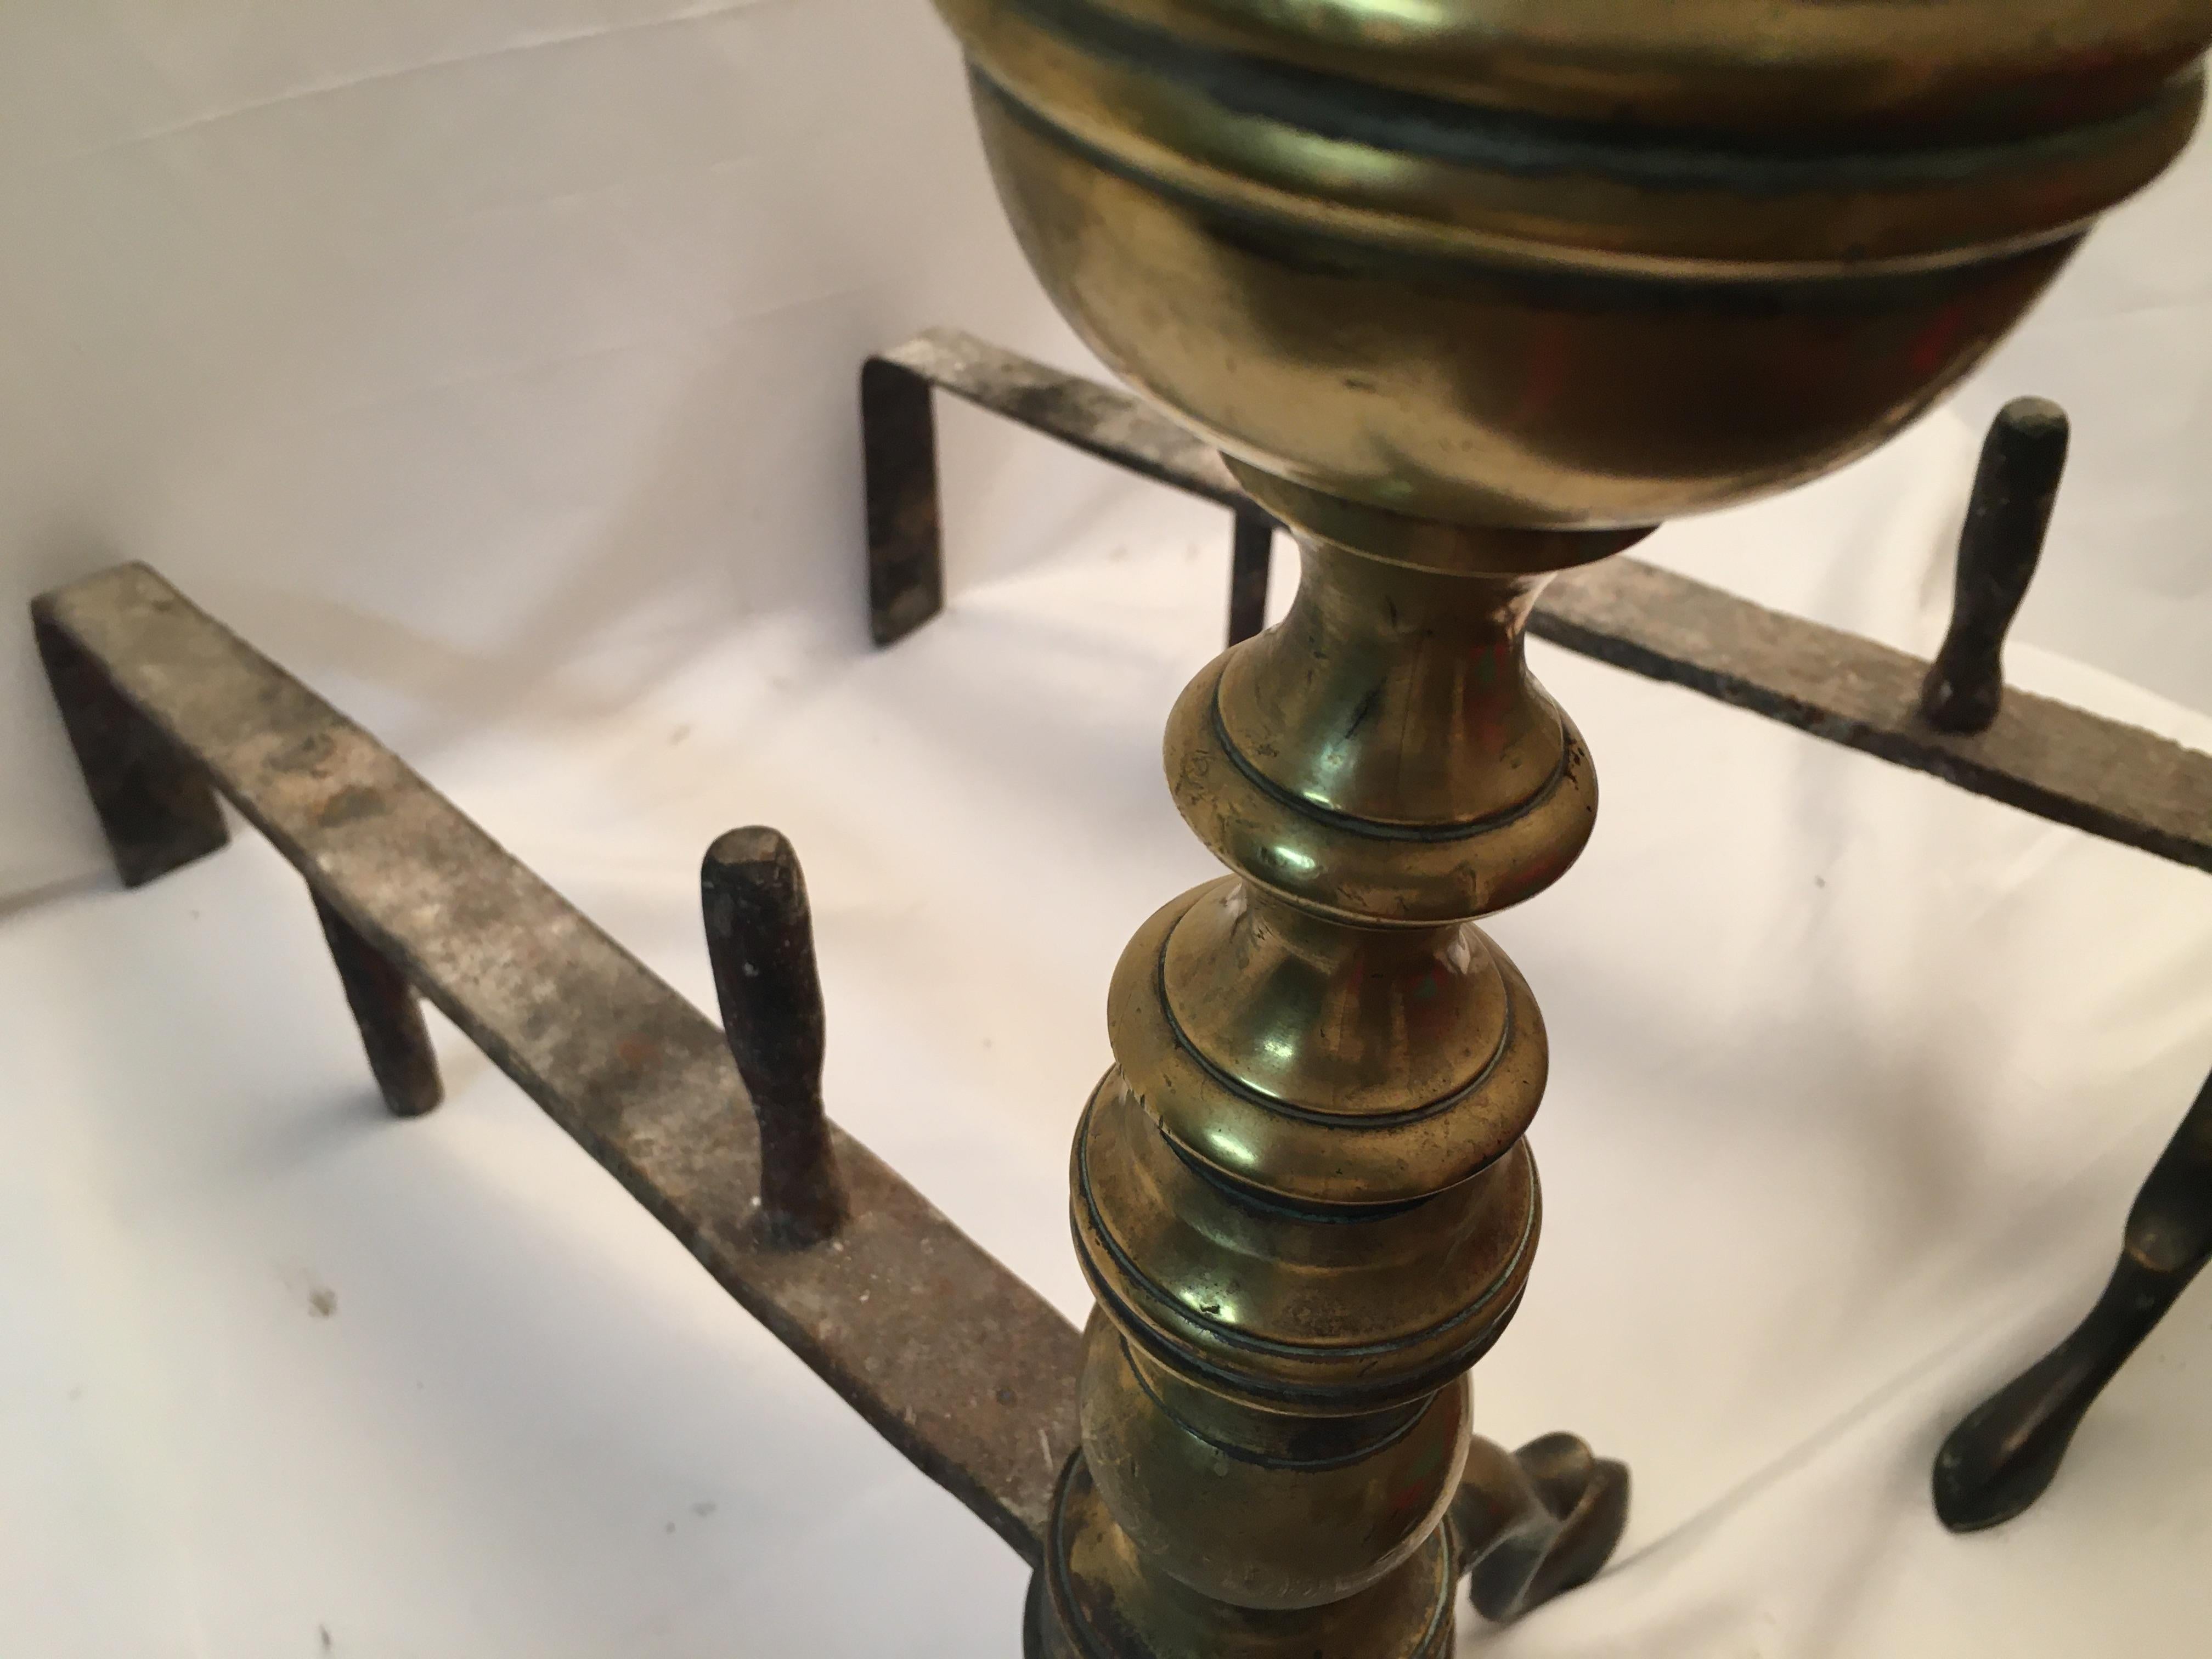 This handsome pair of fine brass Early American Chippendale andirons feature multiple turnings topped with a cannon ball style crown. The graceful spurred legs terminate on slipper feet. Sturdy log stops on the firedogs keep wood from slipping off. 